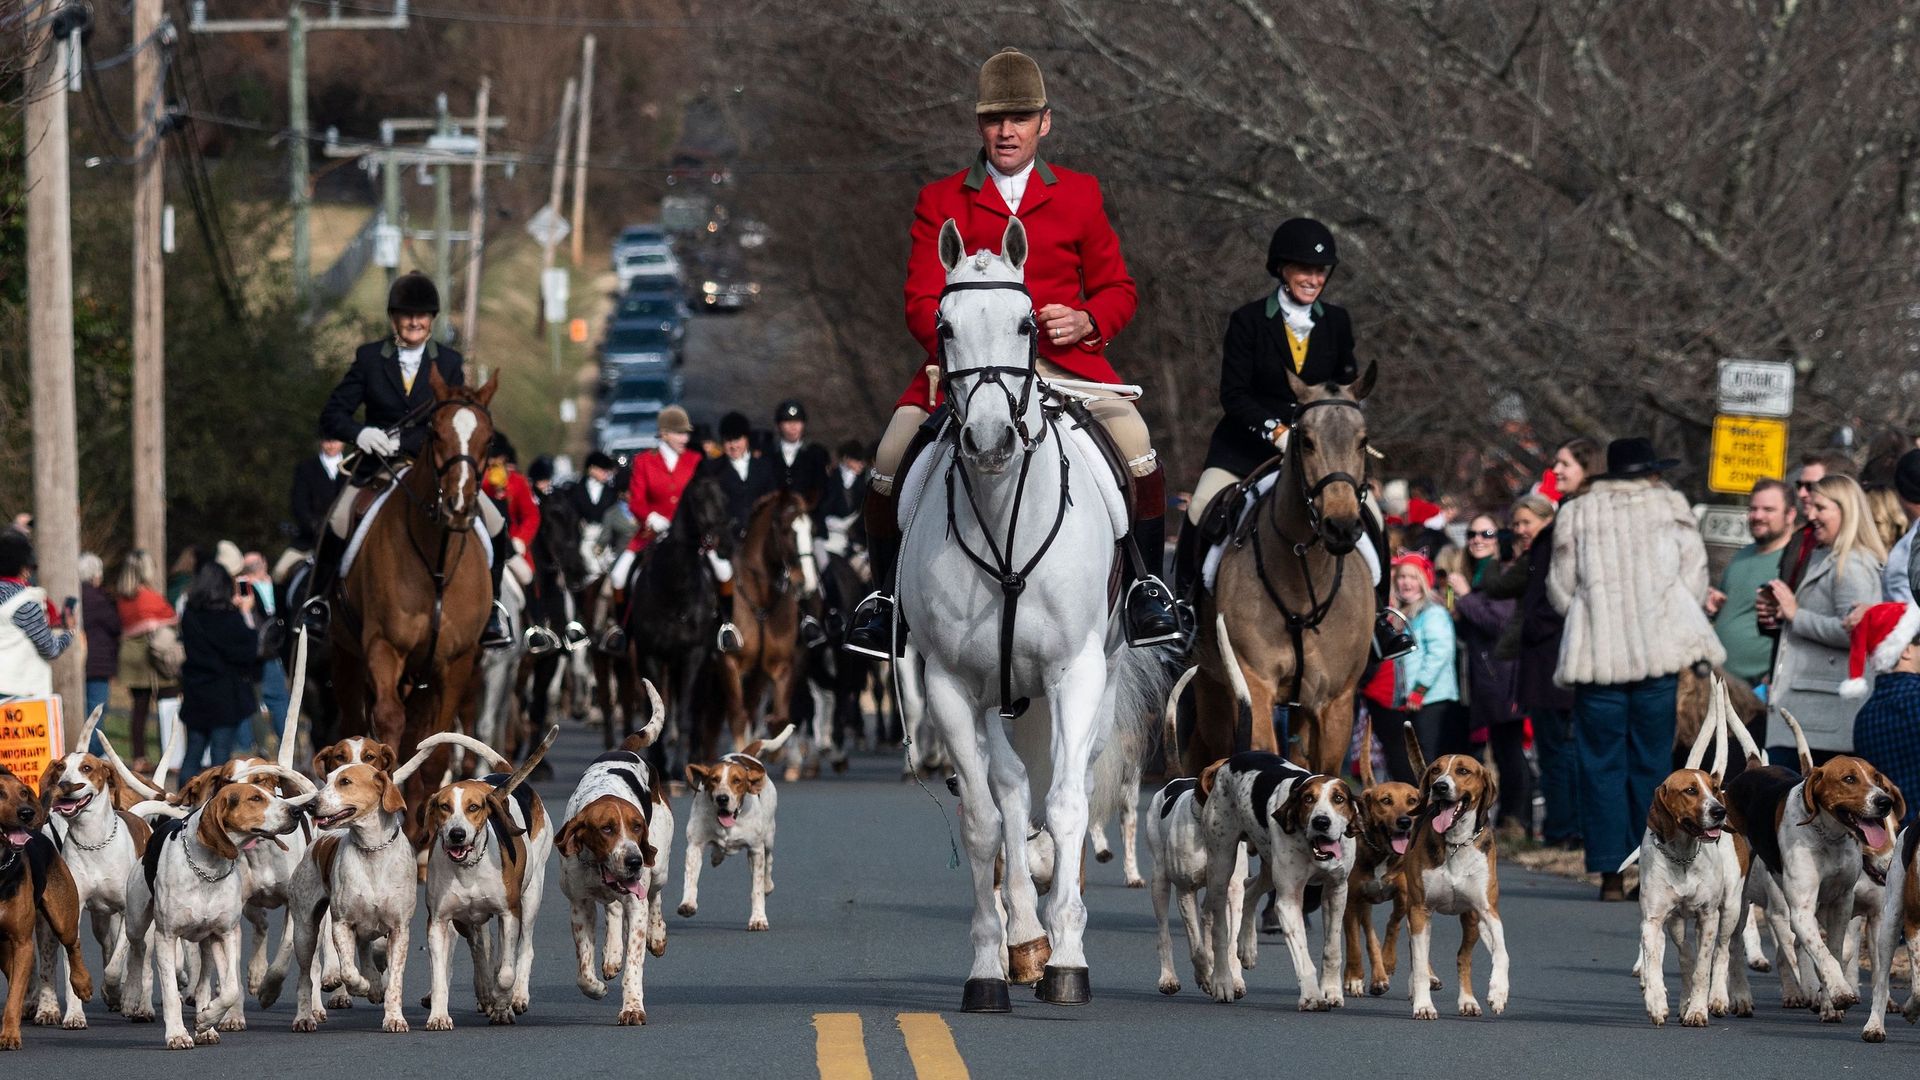 A hunter wearing a red coat on a white horse trots down a street surrounded by hunting dogs